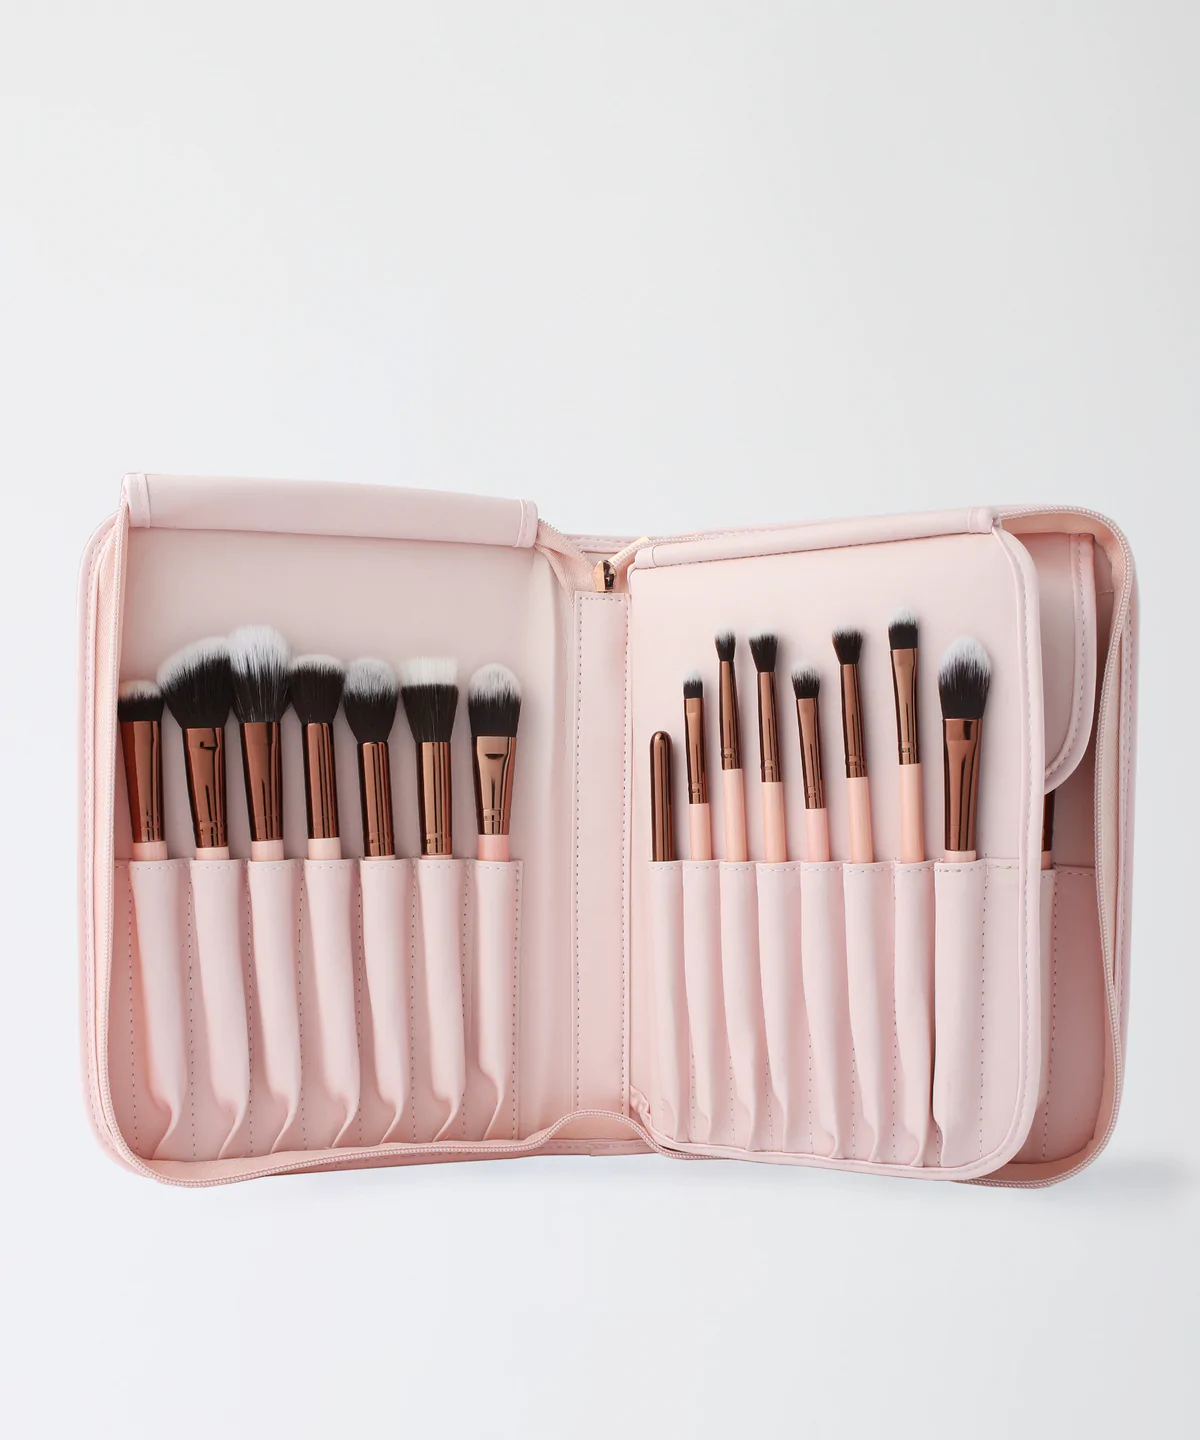 Luxie Beauty Rose Gold Brush set